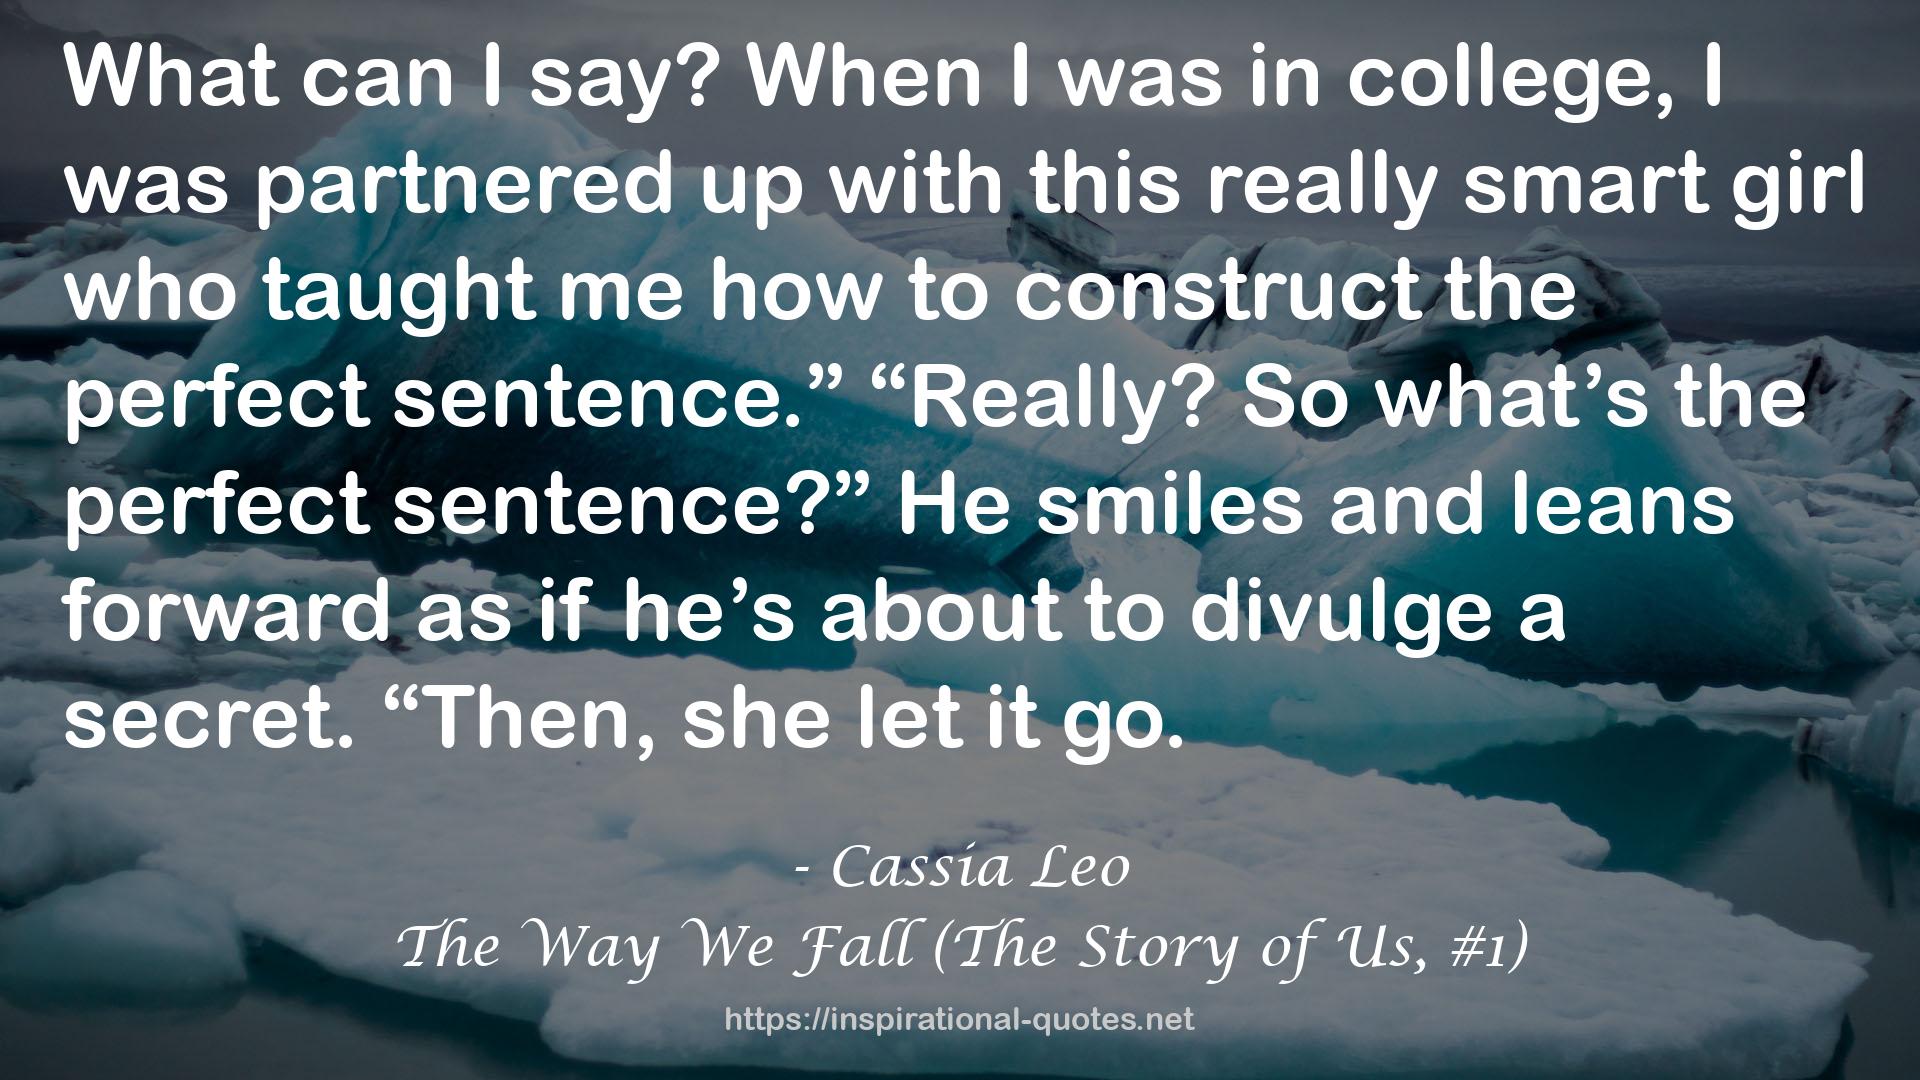 The Way We Fall (The Story of Us, #1) QUOTES